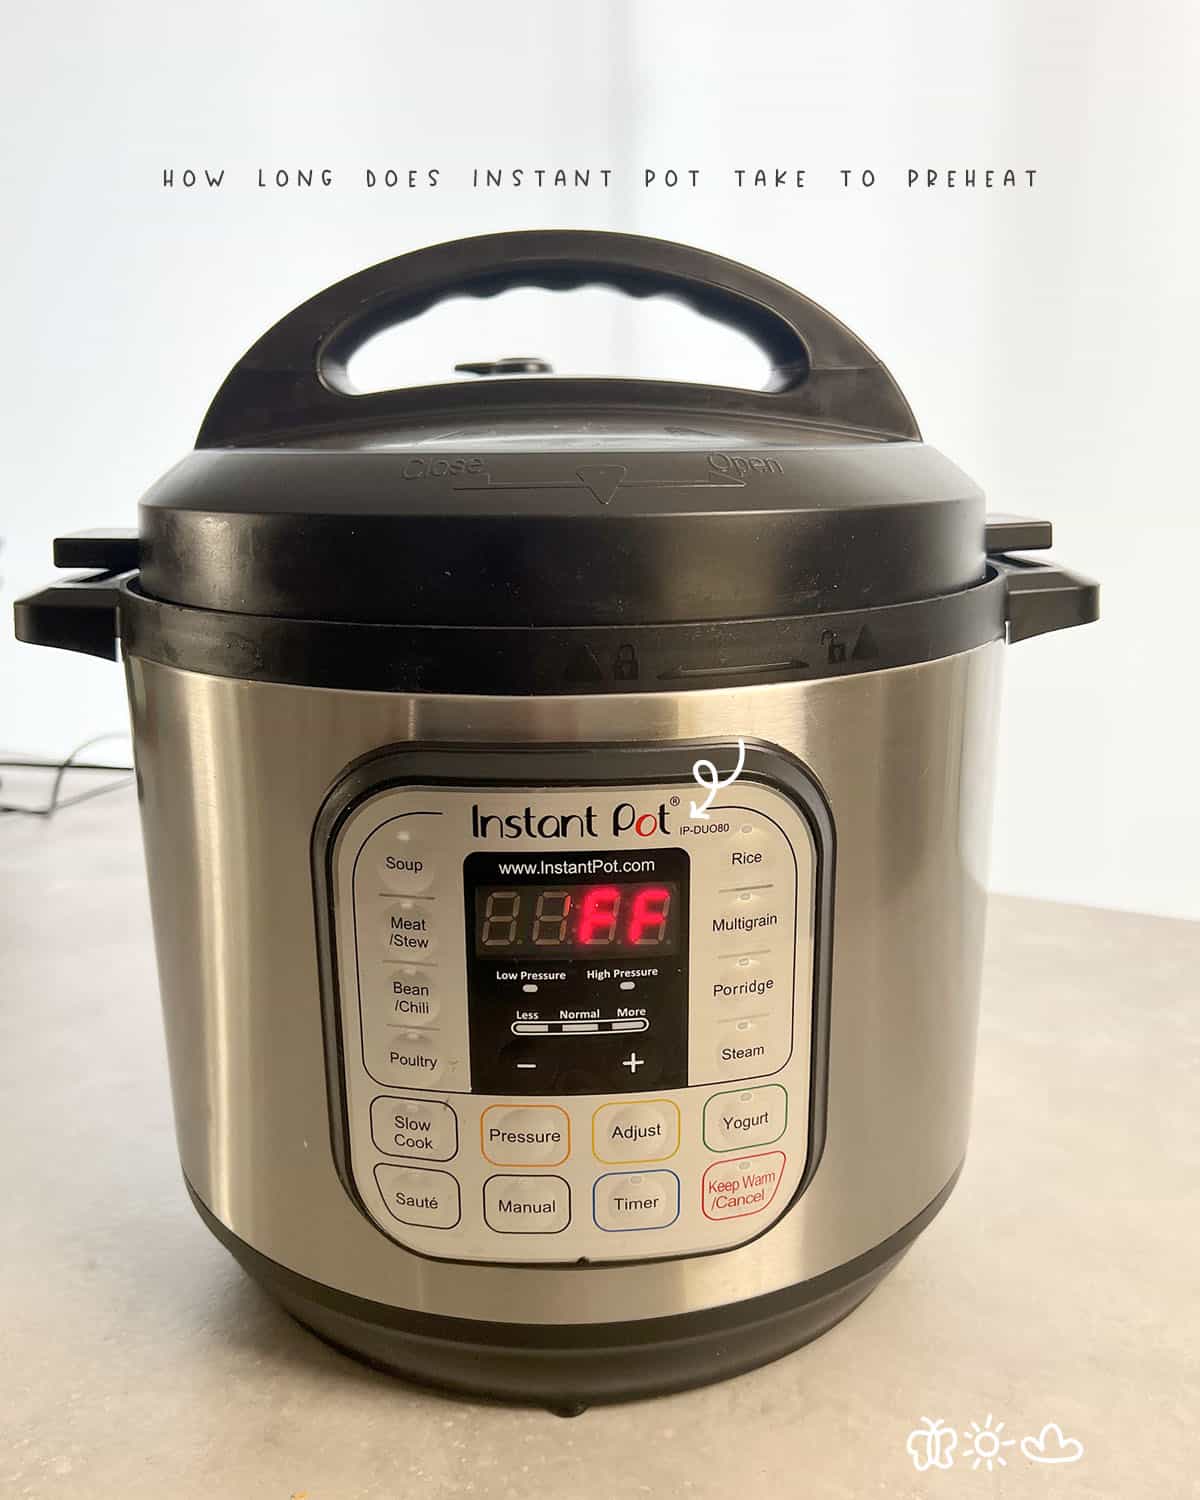 The Instant Pot is a magical appliance that can do it all--serve as a slow cooker, pressure cooker, rice cooker, and more. But one question often arises among users: how long does the Instant Pot take to preheat? The answer might surprise you!